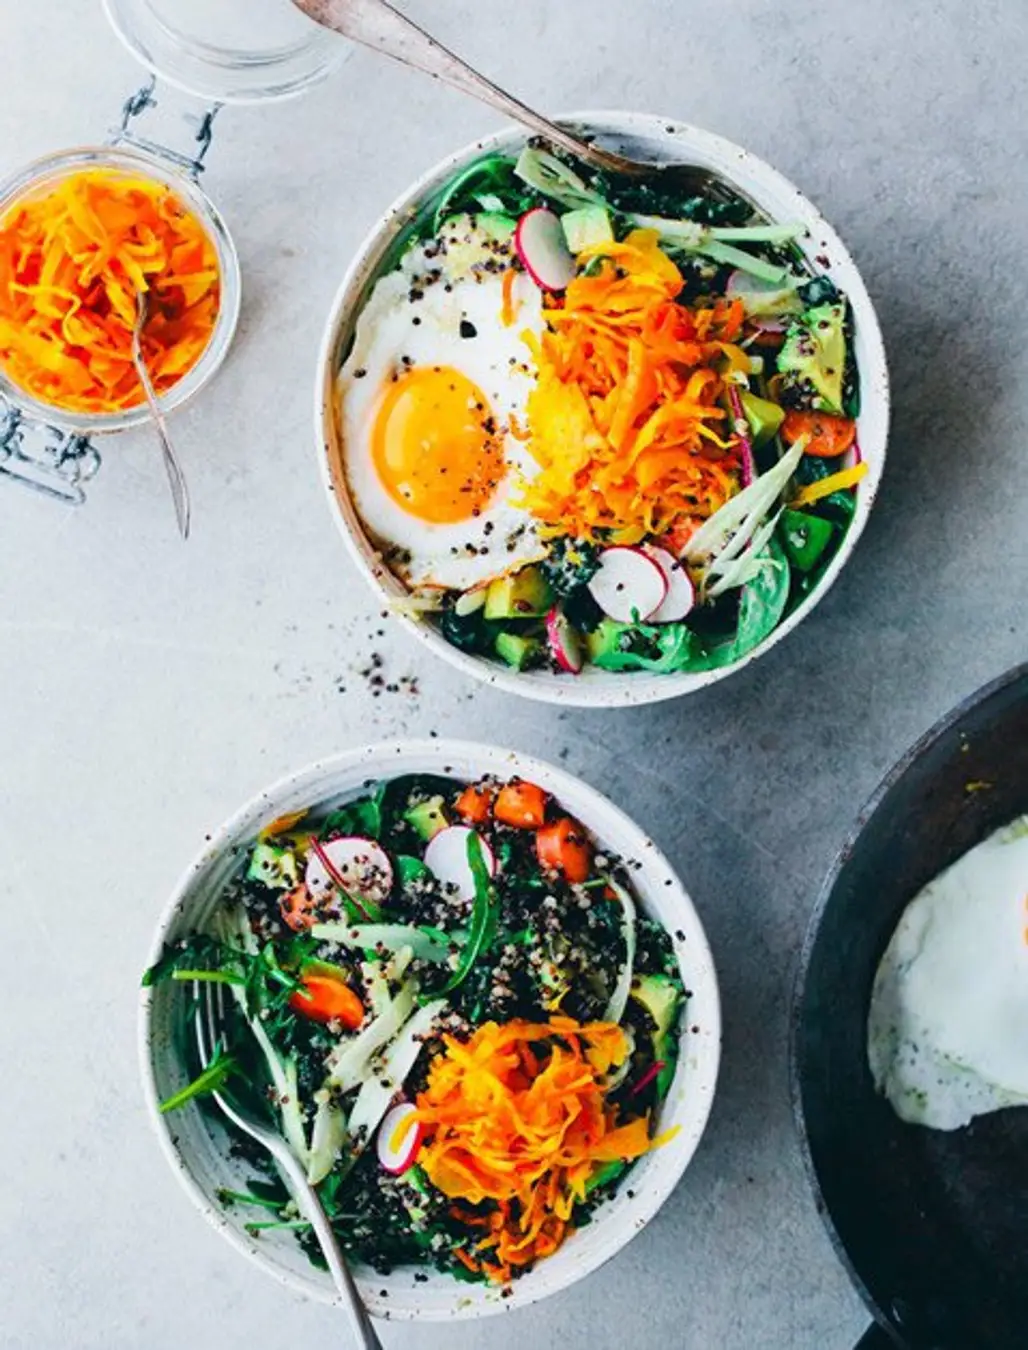 Egg, Carrot, and Kale Salad